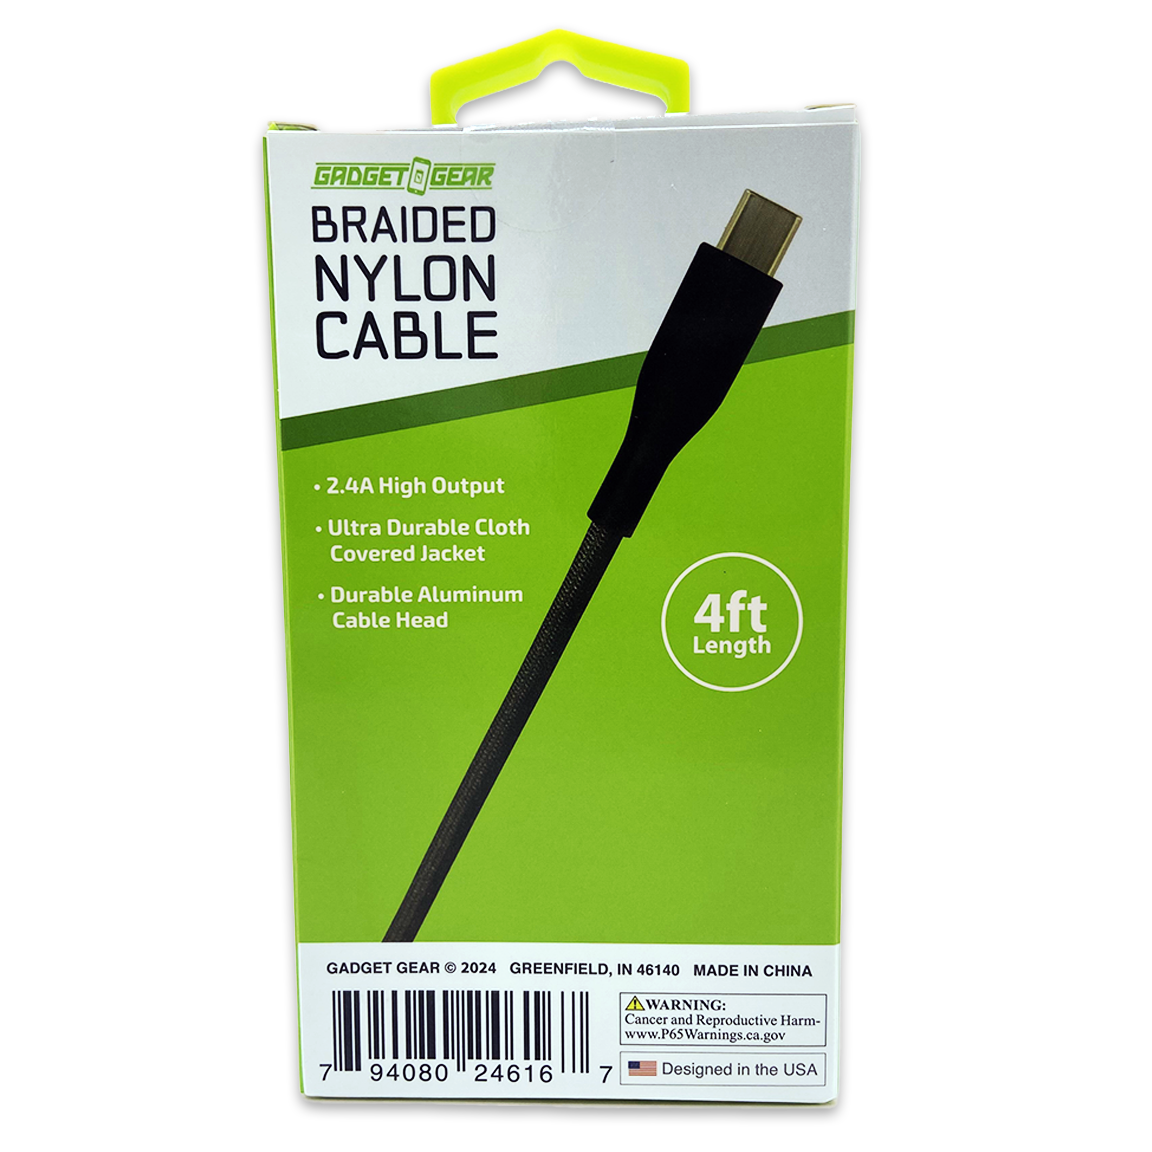 WHOLESALE 4FT USB-A-TO-USB-C NYLON BRAIDED CABLE 3 PIECES PER PACK 24616